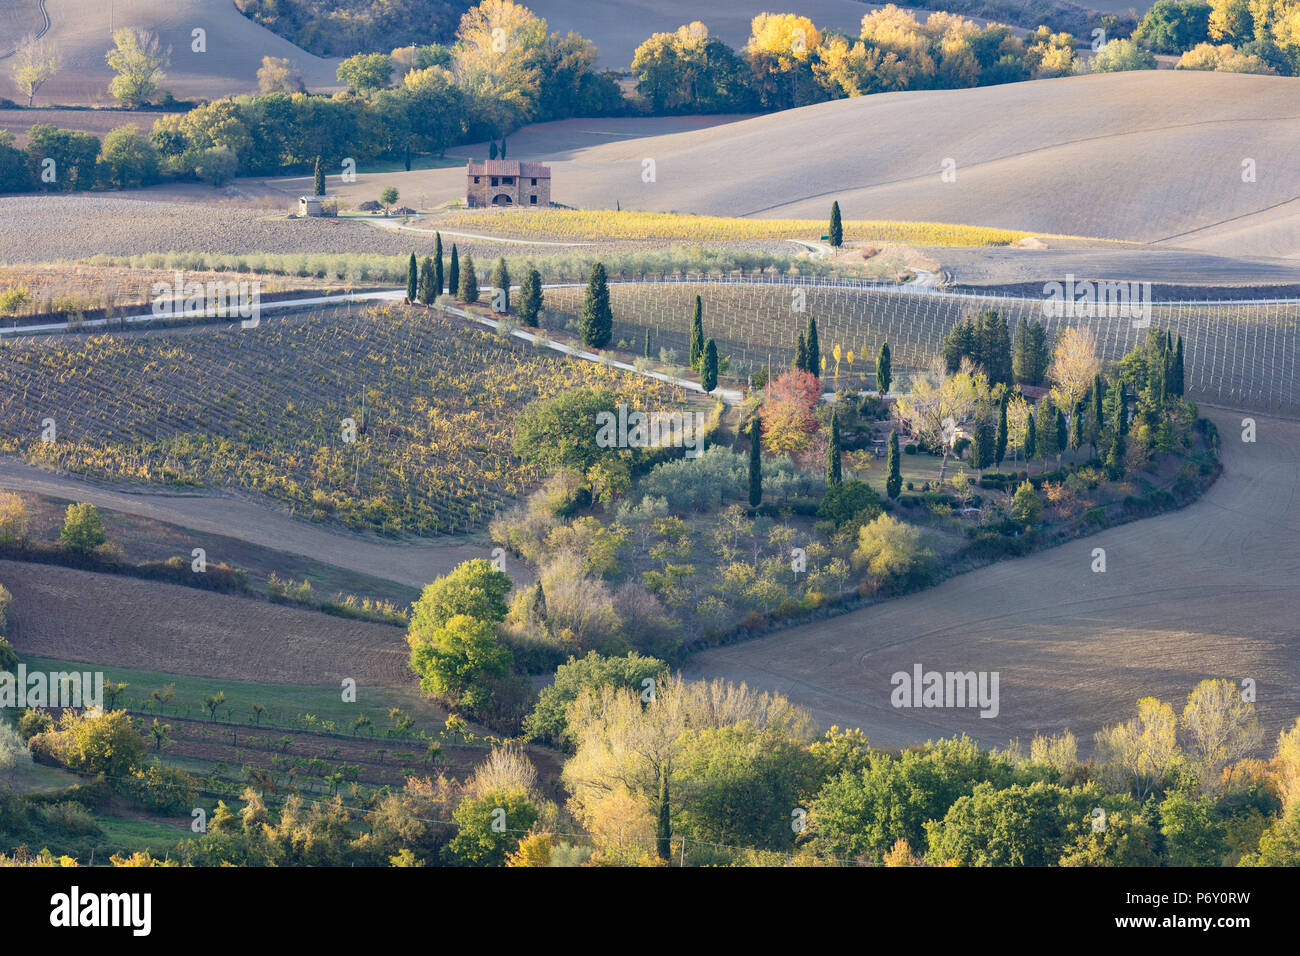 A farmhouse surrounded by vines and ploughed fields in the autumn, Montepulciano, Val d'Orcia, Tuscany, Italy Stock Photo